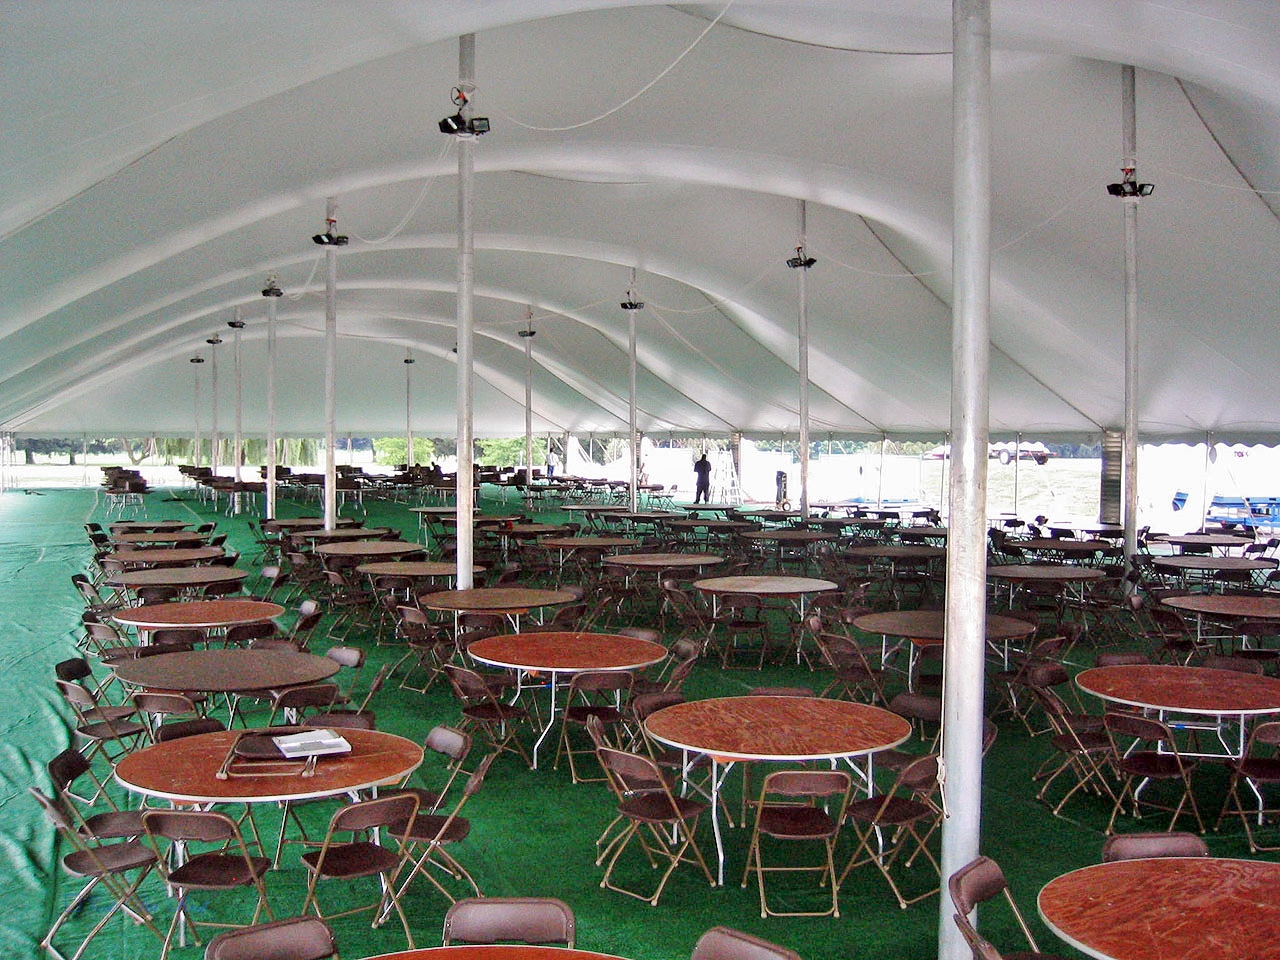 Brown chairs, round tables and flooring to rent for your tent event